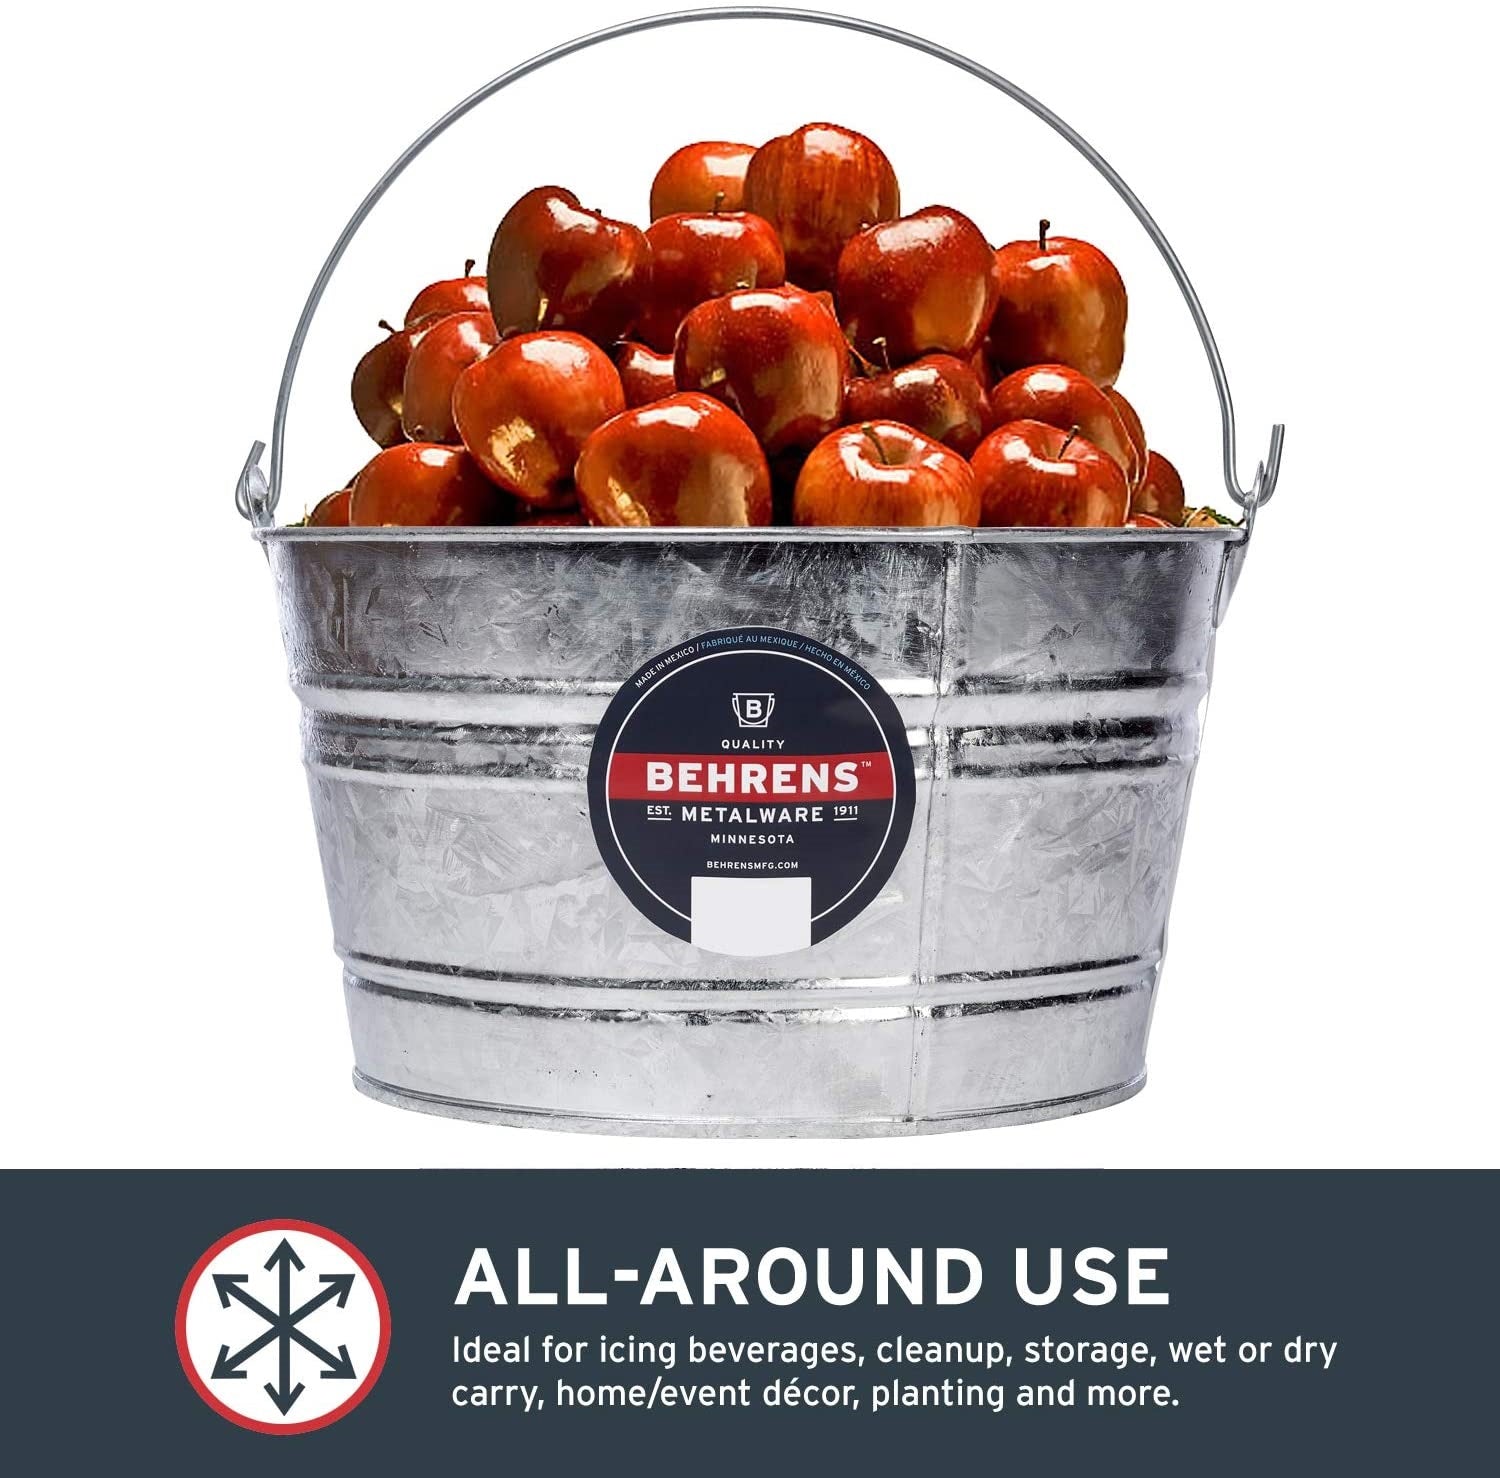 Behrens Hot Dipped Galvanized Steel Utility Pail, Silver - 4.25 Gallon Capacity